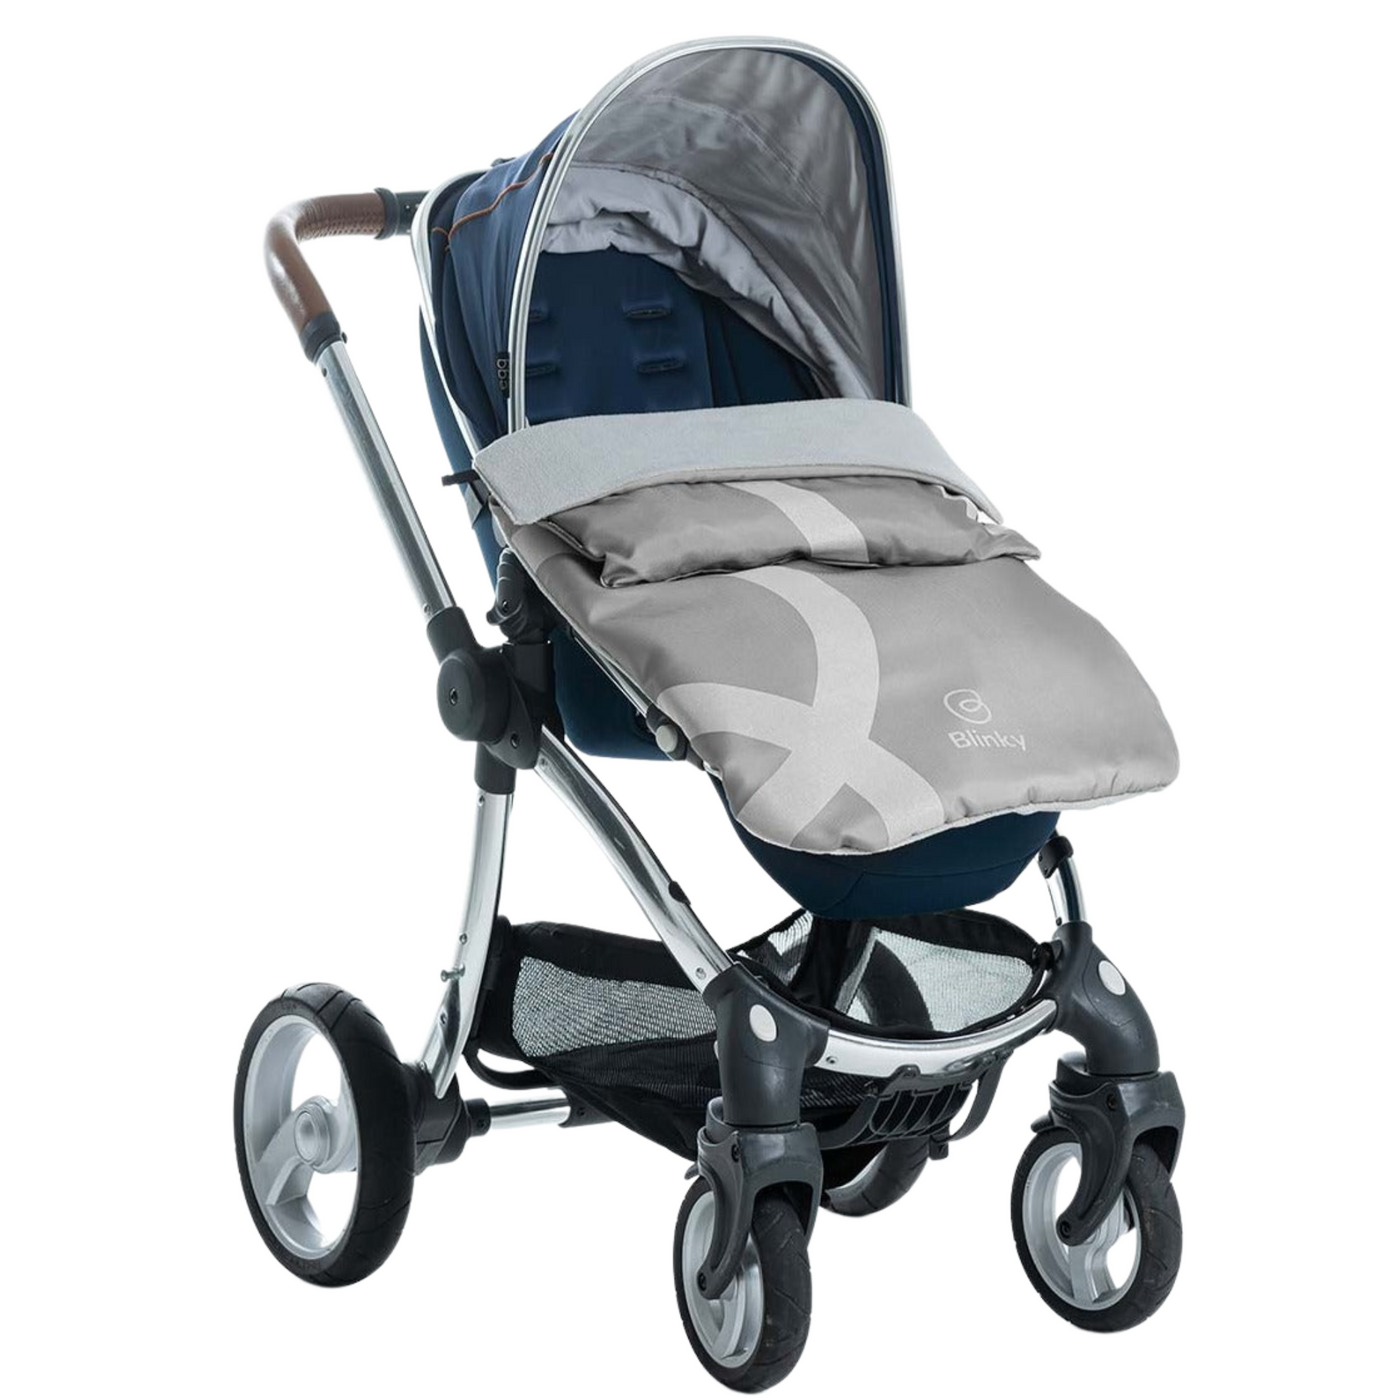 Lady pushing stroller with BlinkyWarm in Silver